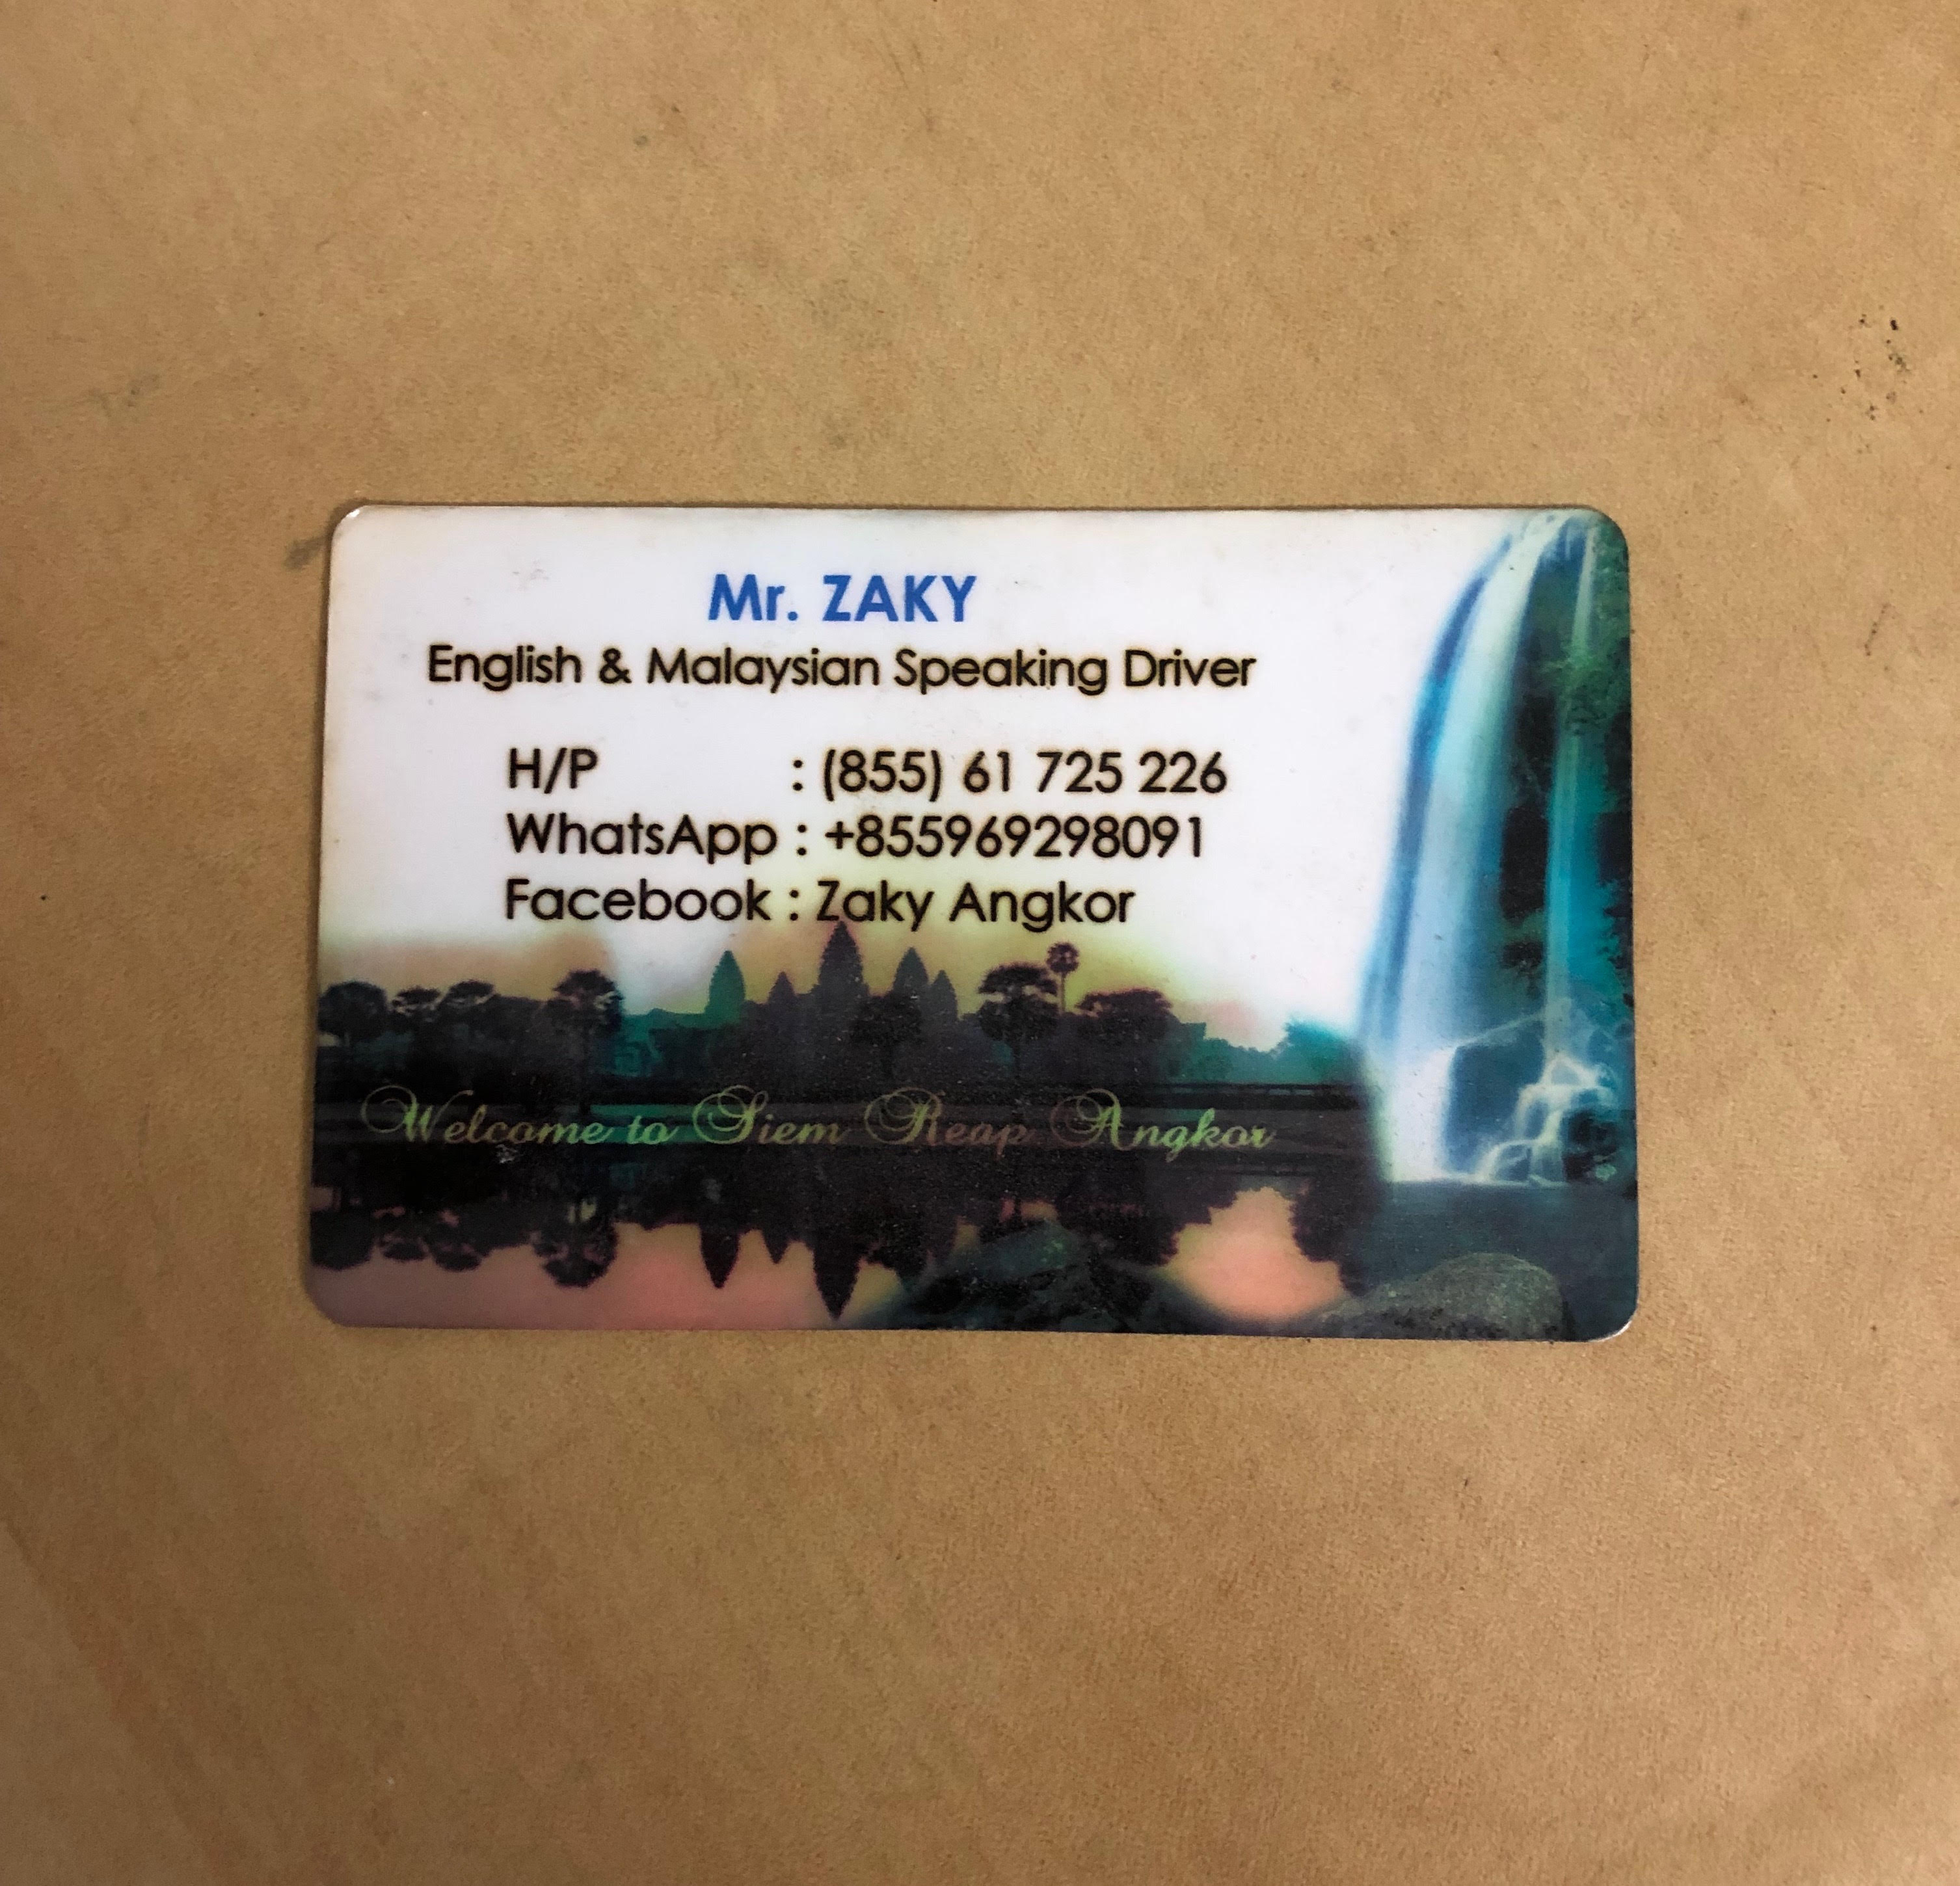 This is the business card of Zaky. He is a muslim and can speak Malay fluently. He was very helpful too and knows where to go for Halal food. Let's help the tuktuk driver at Siem Reap.